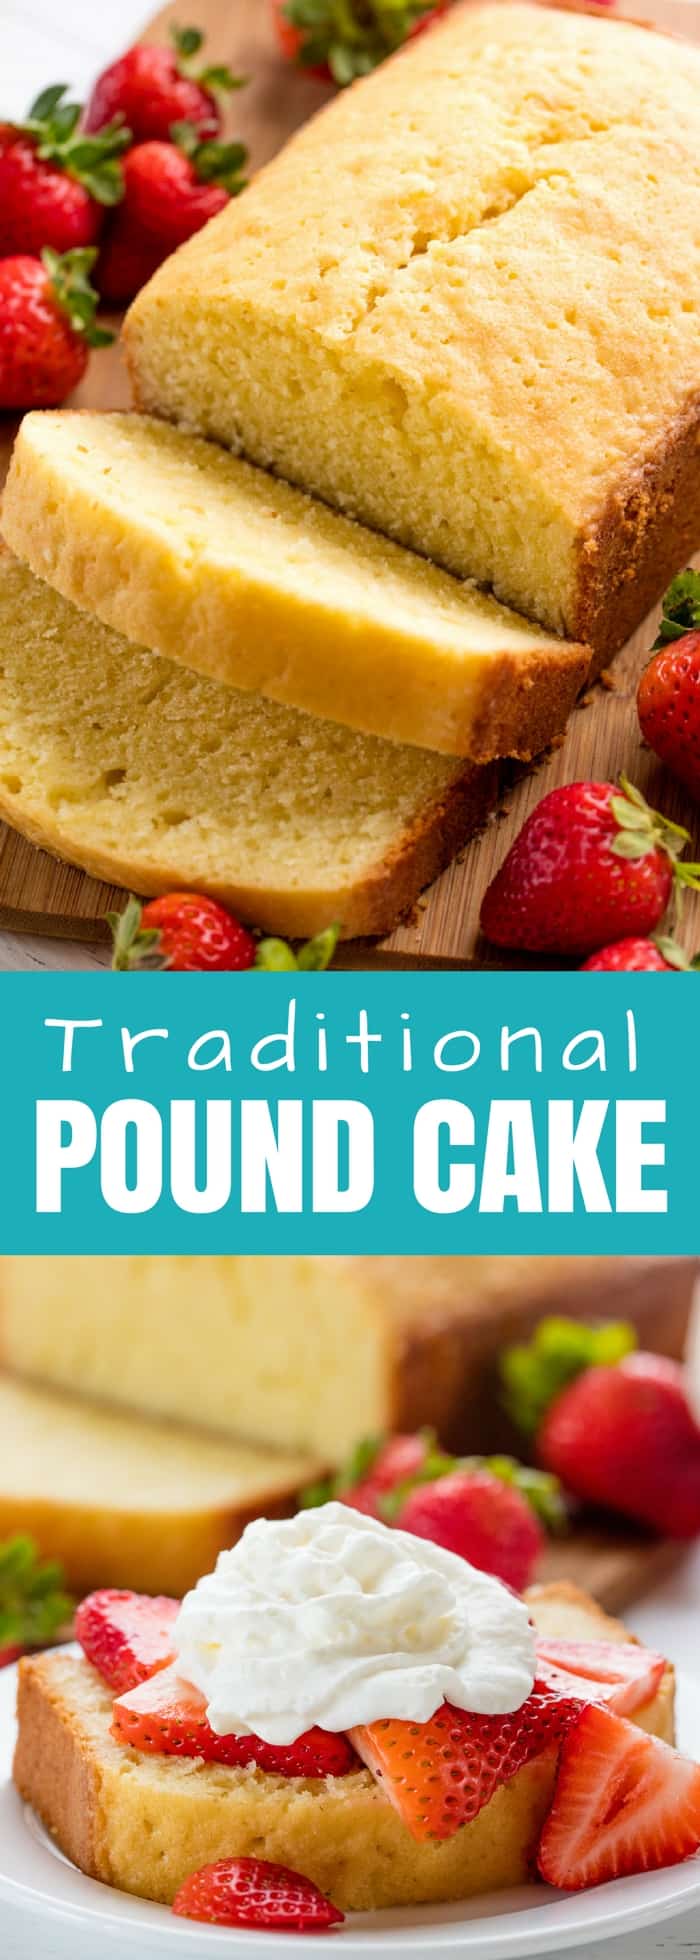 Traditional Pound Cake is made with equal parts butter, sugar, eggs, and flour. Anything else is just a variation!